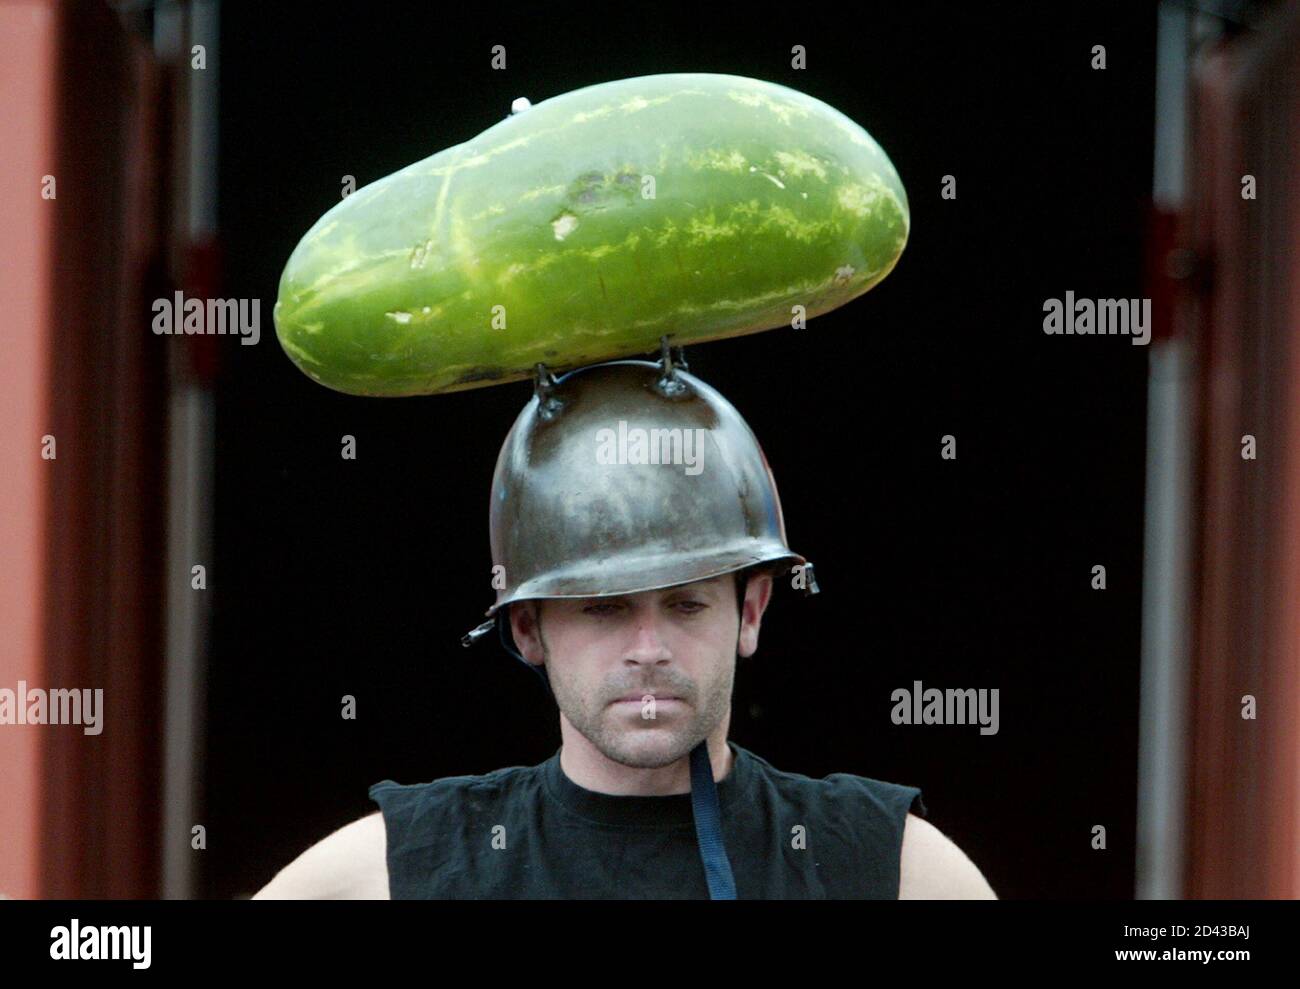 A man from the 'Dare Devil Opera' wears helmet with watermelon on top before it explodes in Sydney March 10, 2004. The exploding watermelon is part of a series of events staged for the amusement of patrons to the Dare Devil Opera, entertainment set to rock music and explosions. REUTERS/Will Burgess HIGH RESOLUTION FILE  WB/SN Stock Photo